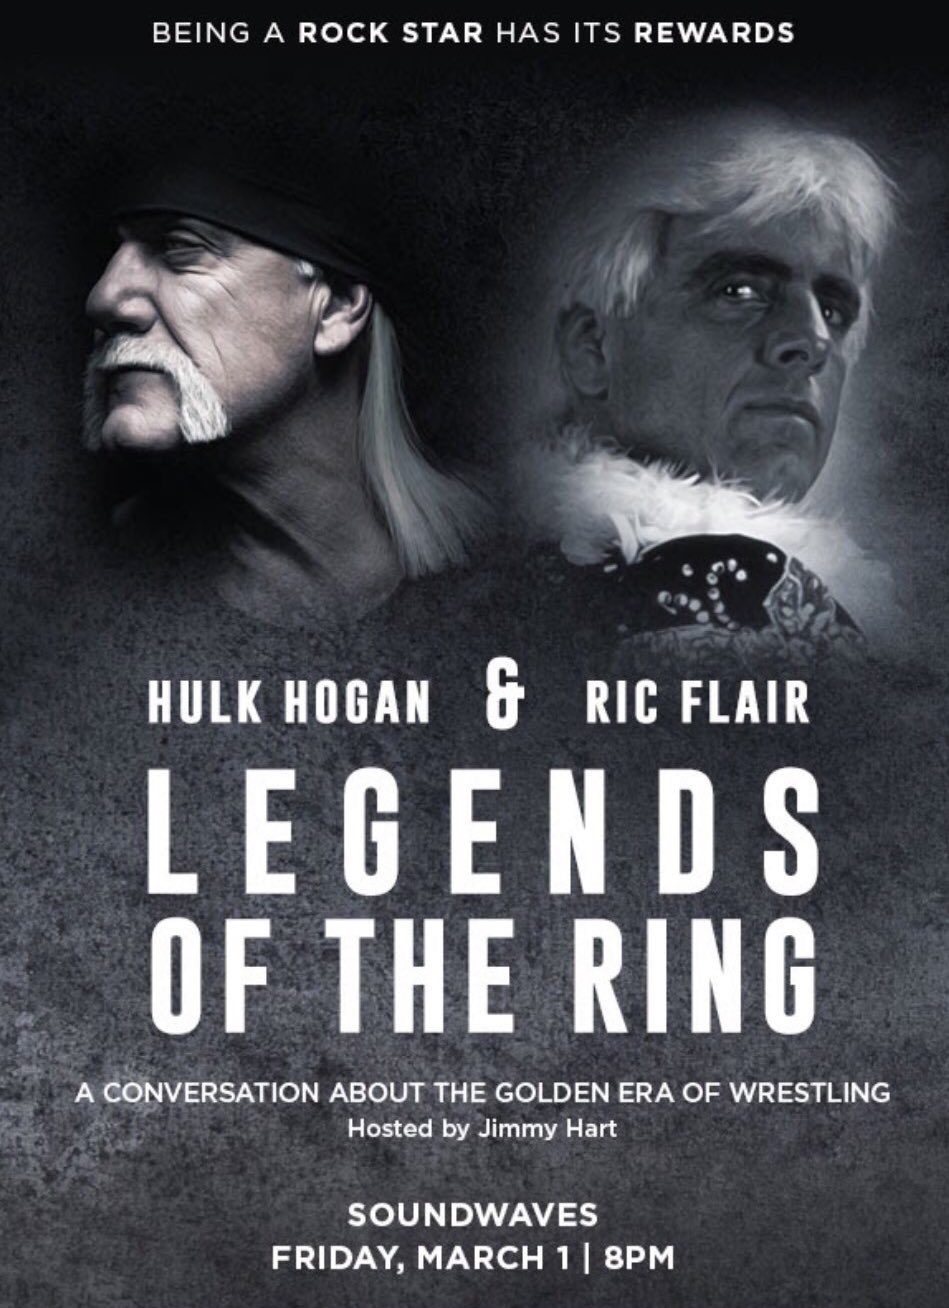 Happy 70th Birthday to Ric Flair! 

I hope to finally get the opportunity to meet you next week! 